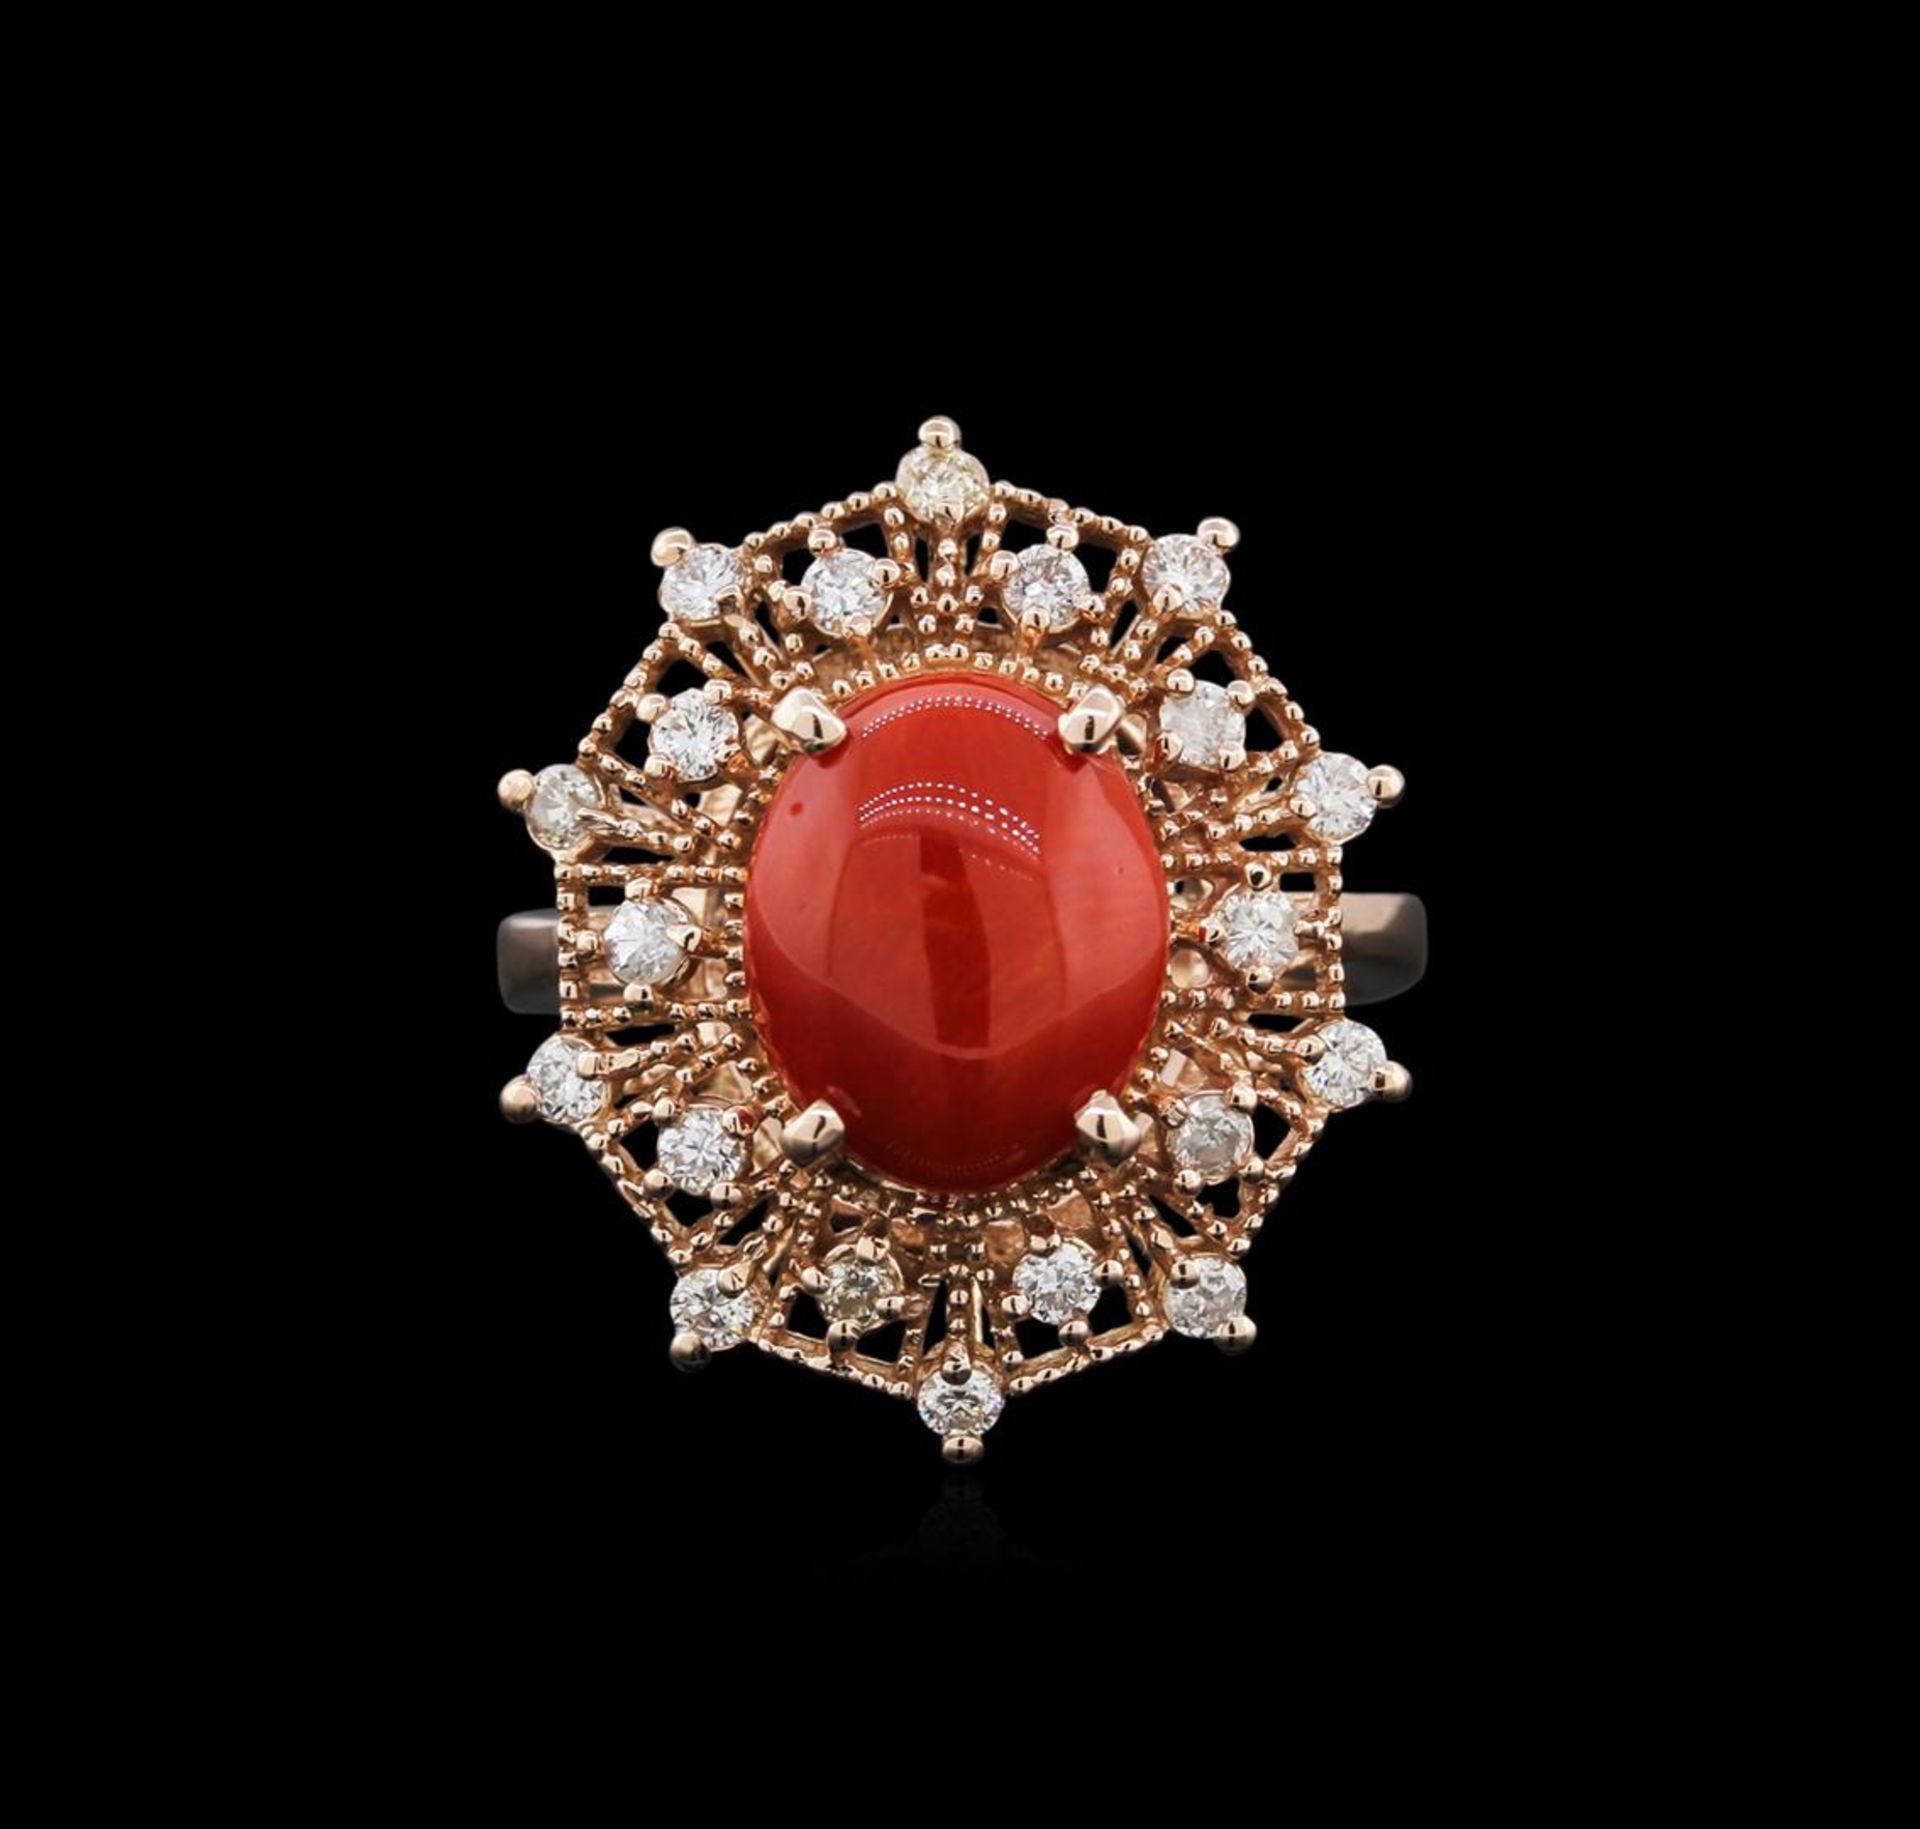 14KT Rose Gold 2.82 ctw Coral and Diamond Ring - Image 2 of 4